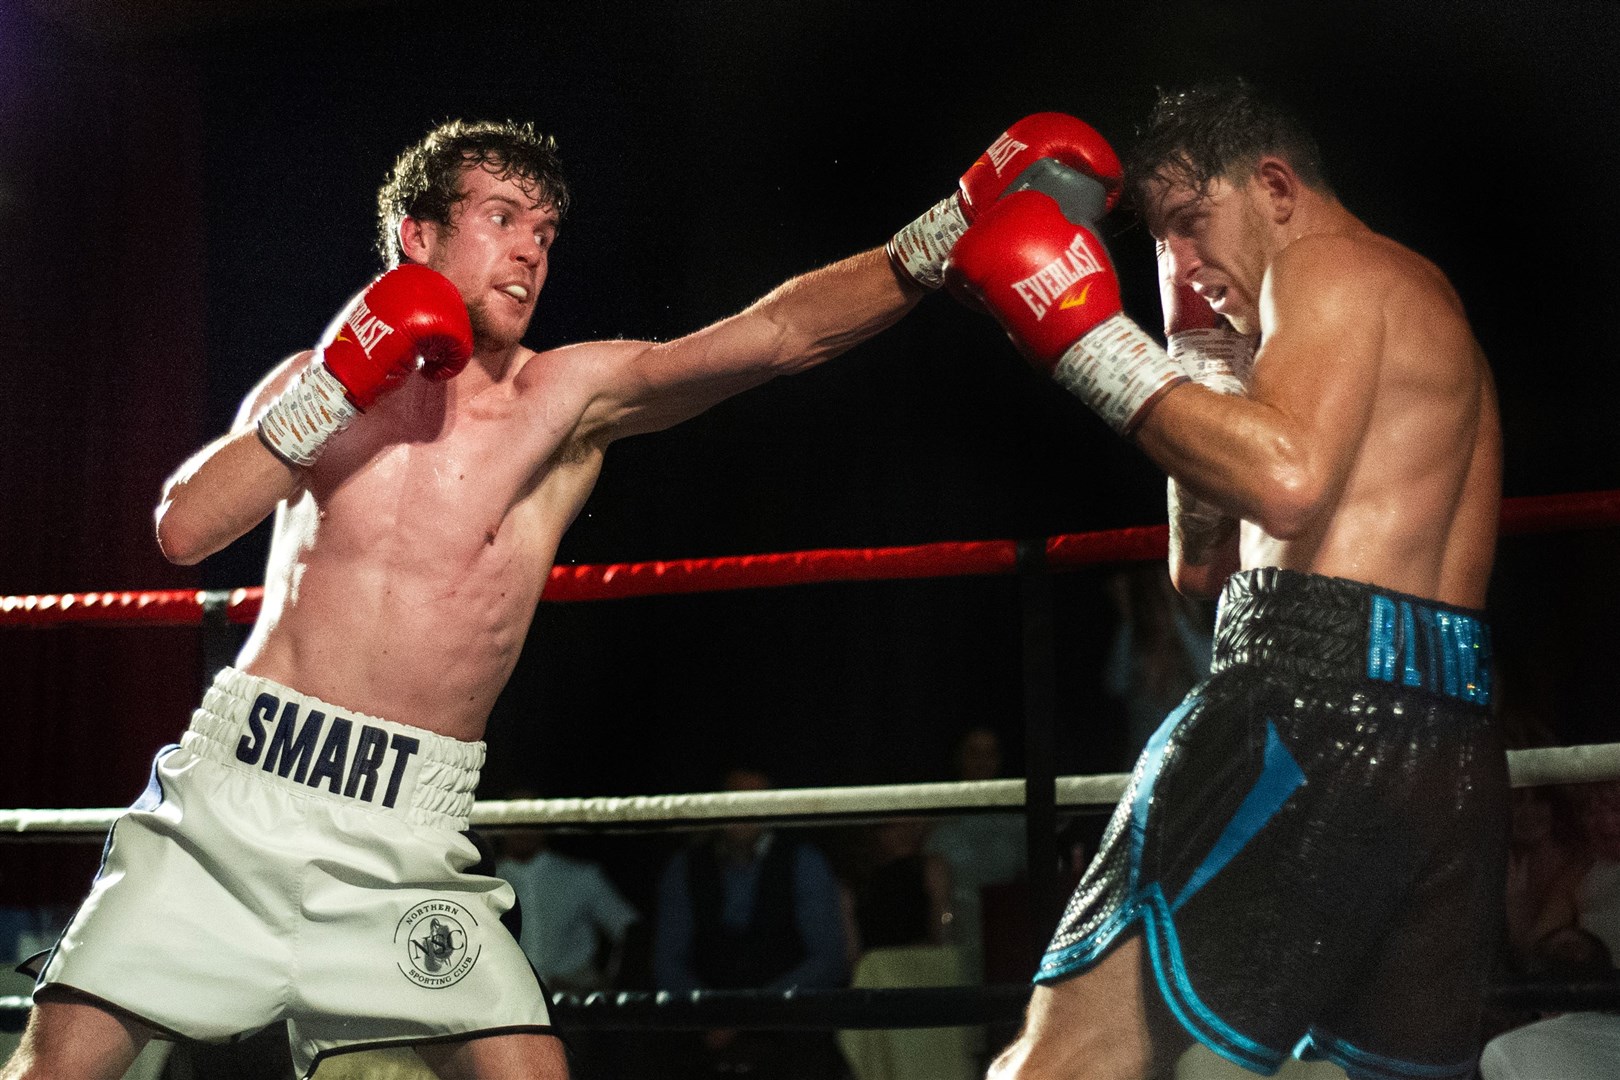 Andrew Smart won on his last appearance at an Elgin Town Hall show. Picture: Daniel Forsyth..